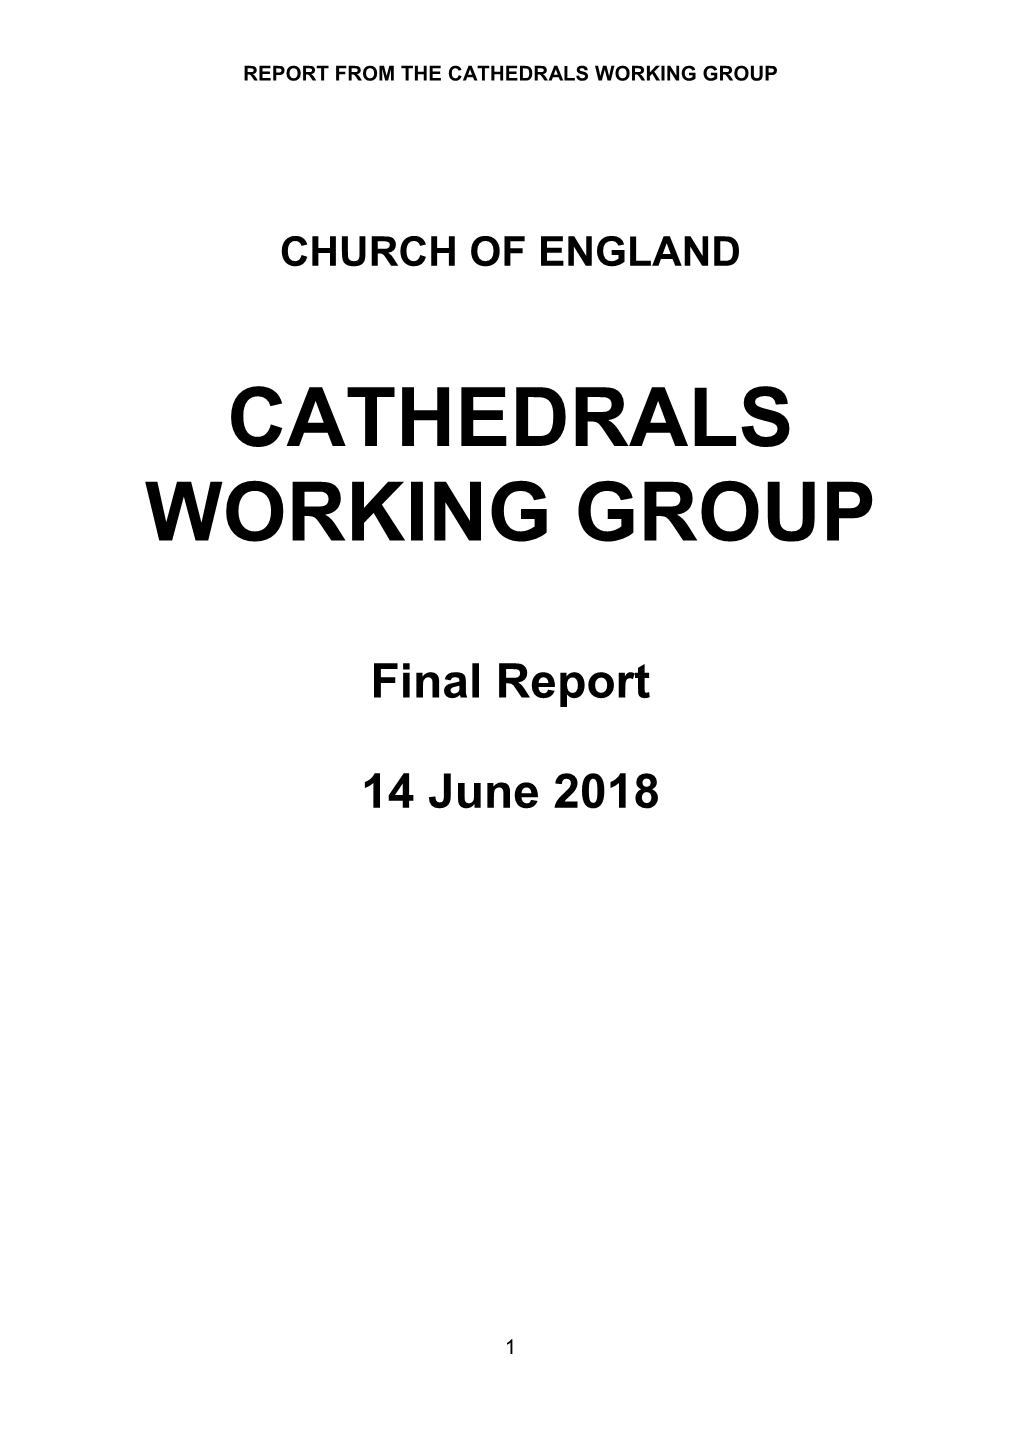 Report of the Cathedrals Working Group